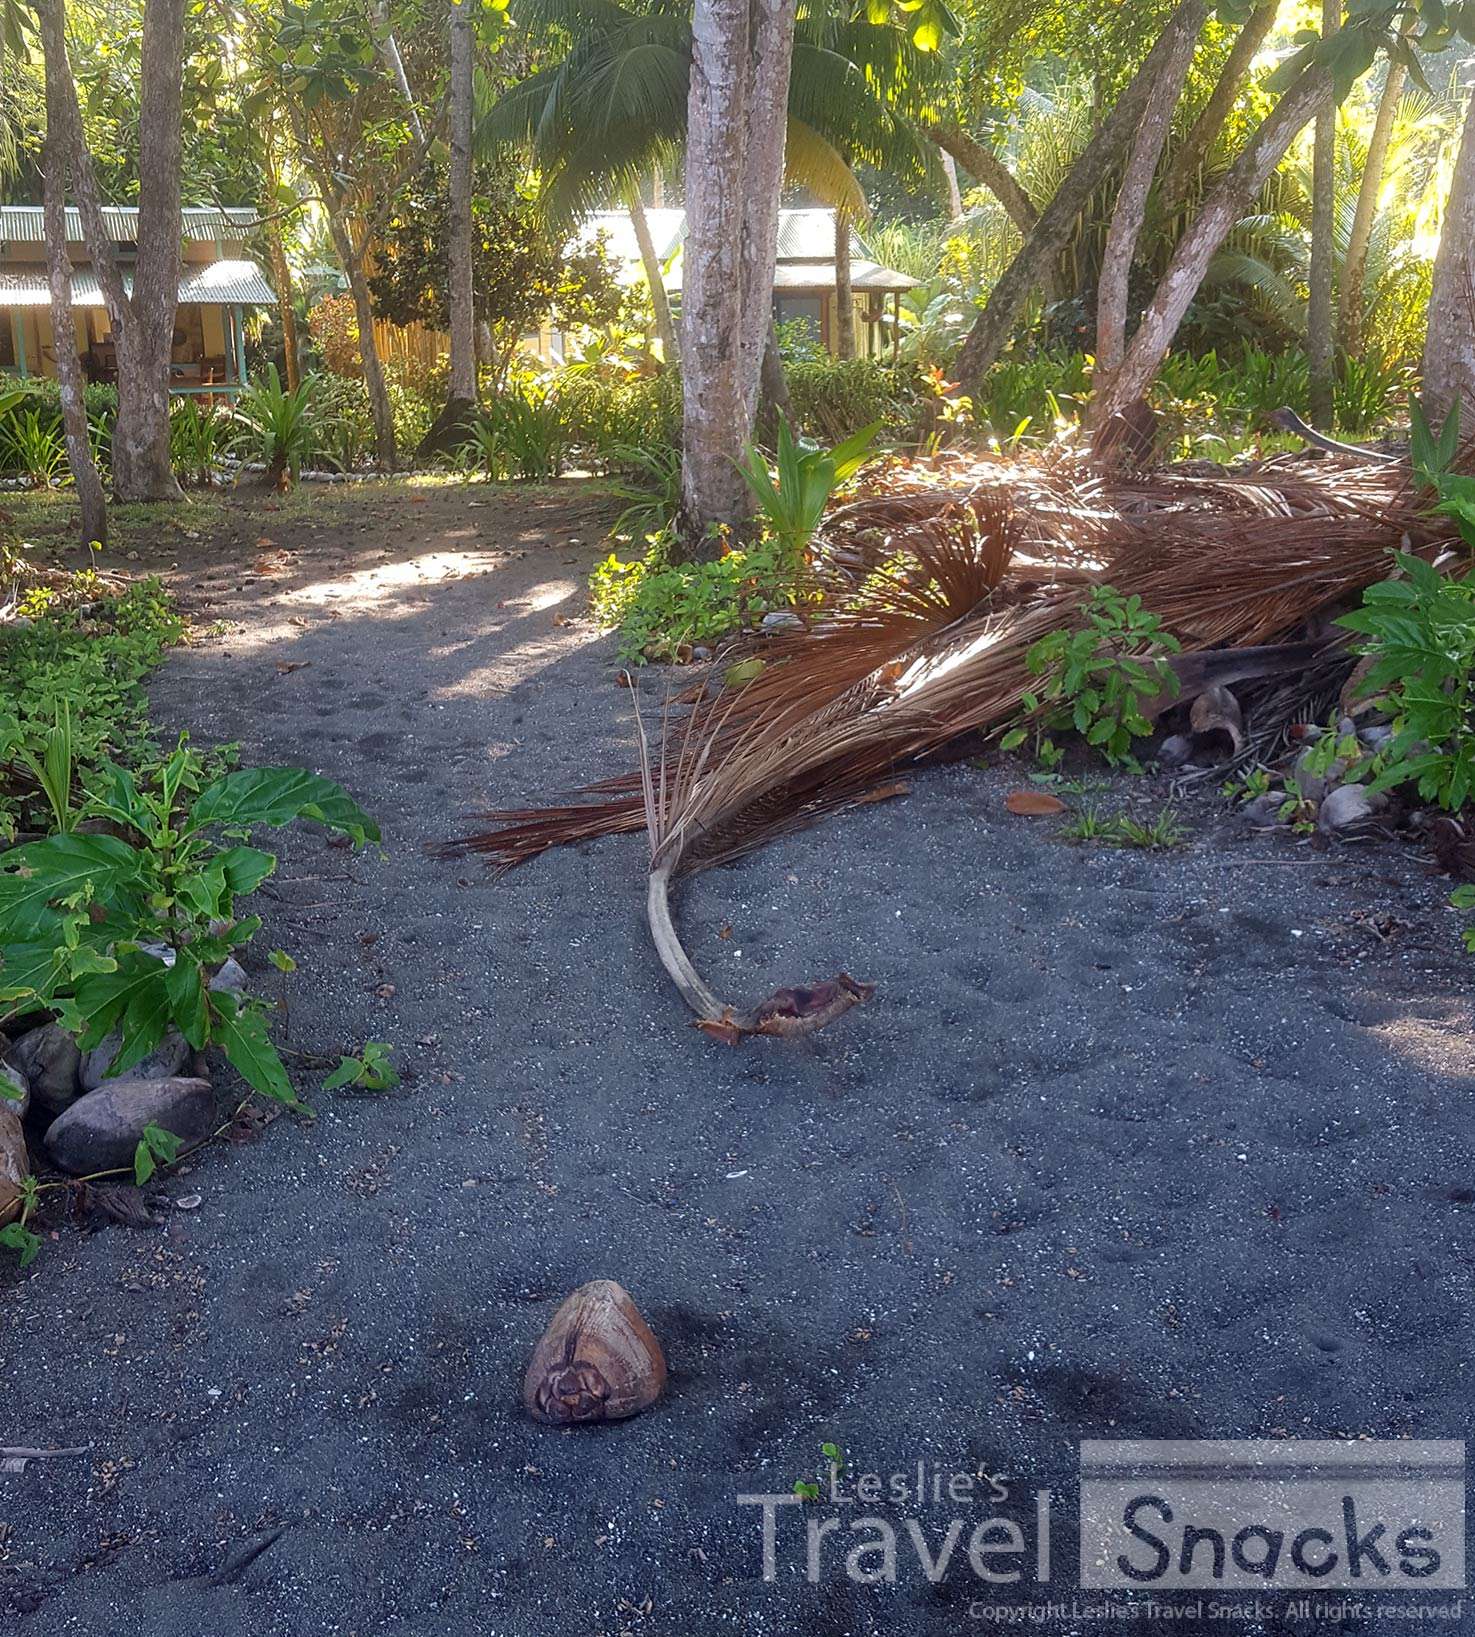 This coconut fell right in the middle of that path I had just walked on. Not to mention those palm fronds, too!